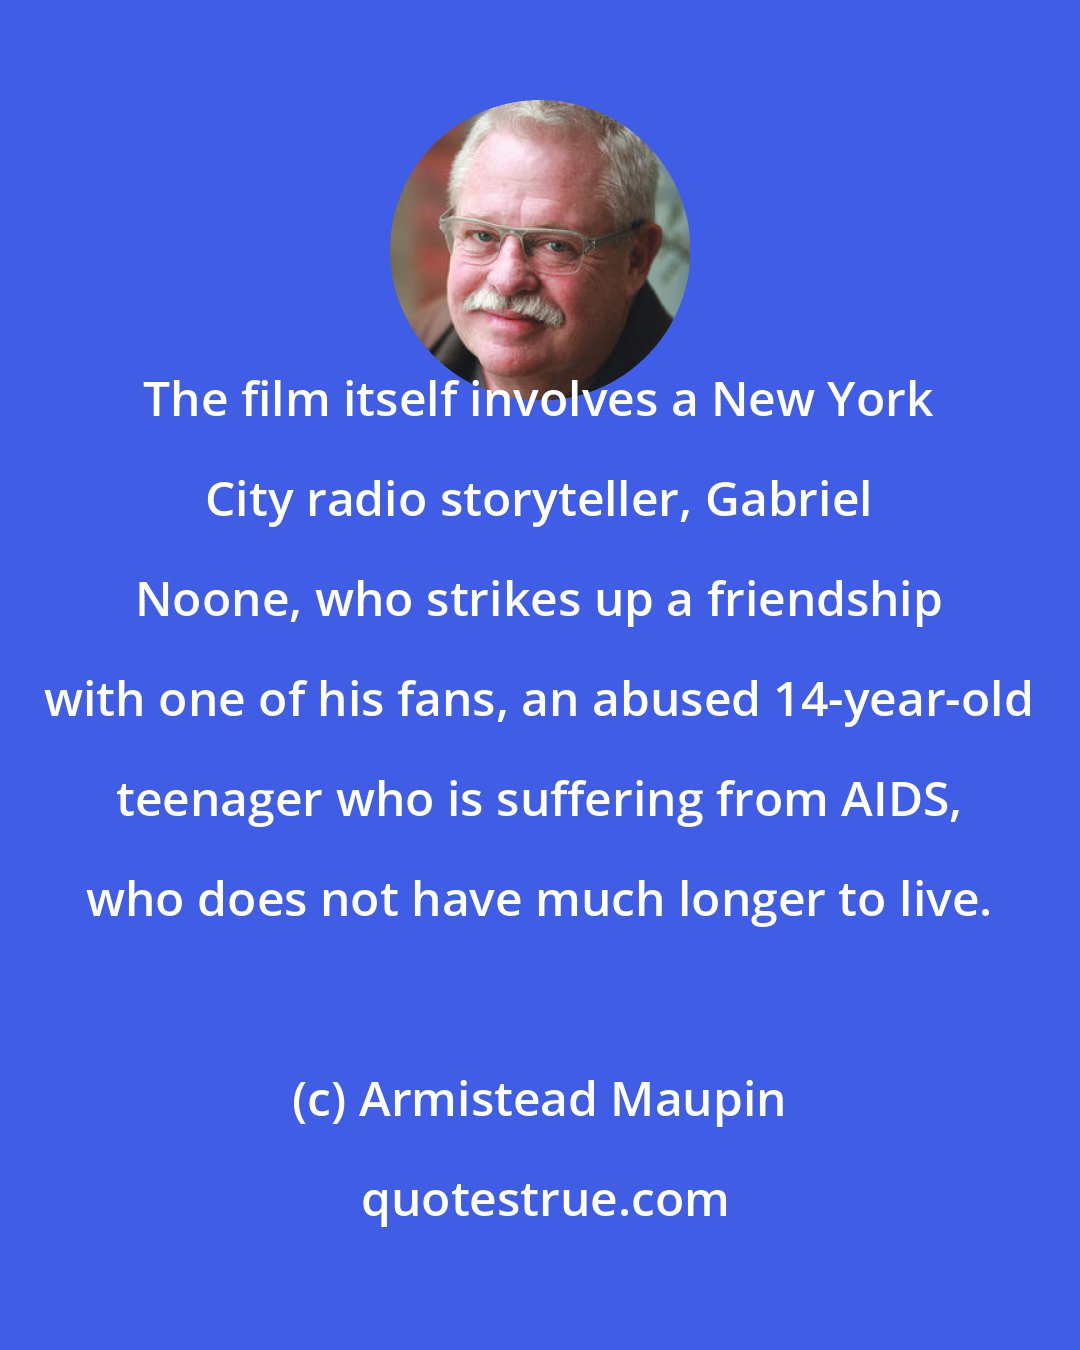 Armistead Maupin: The film itself involves a New York City radio storyteller, Gabriel Noone, who strikes up a friendship with one of his fans, an abused 14-year-old teenager who is suffering from AIDS, who does not have much longer to live.